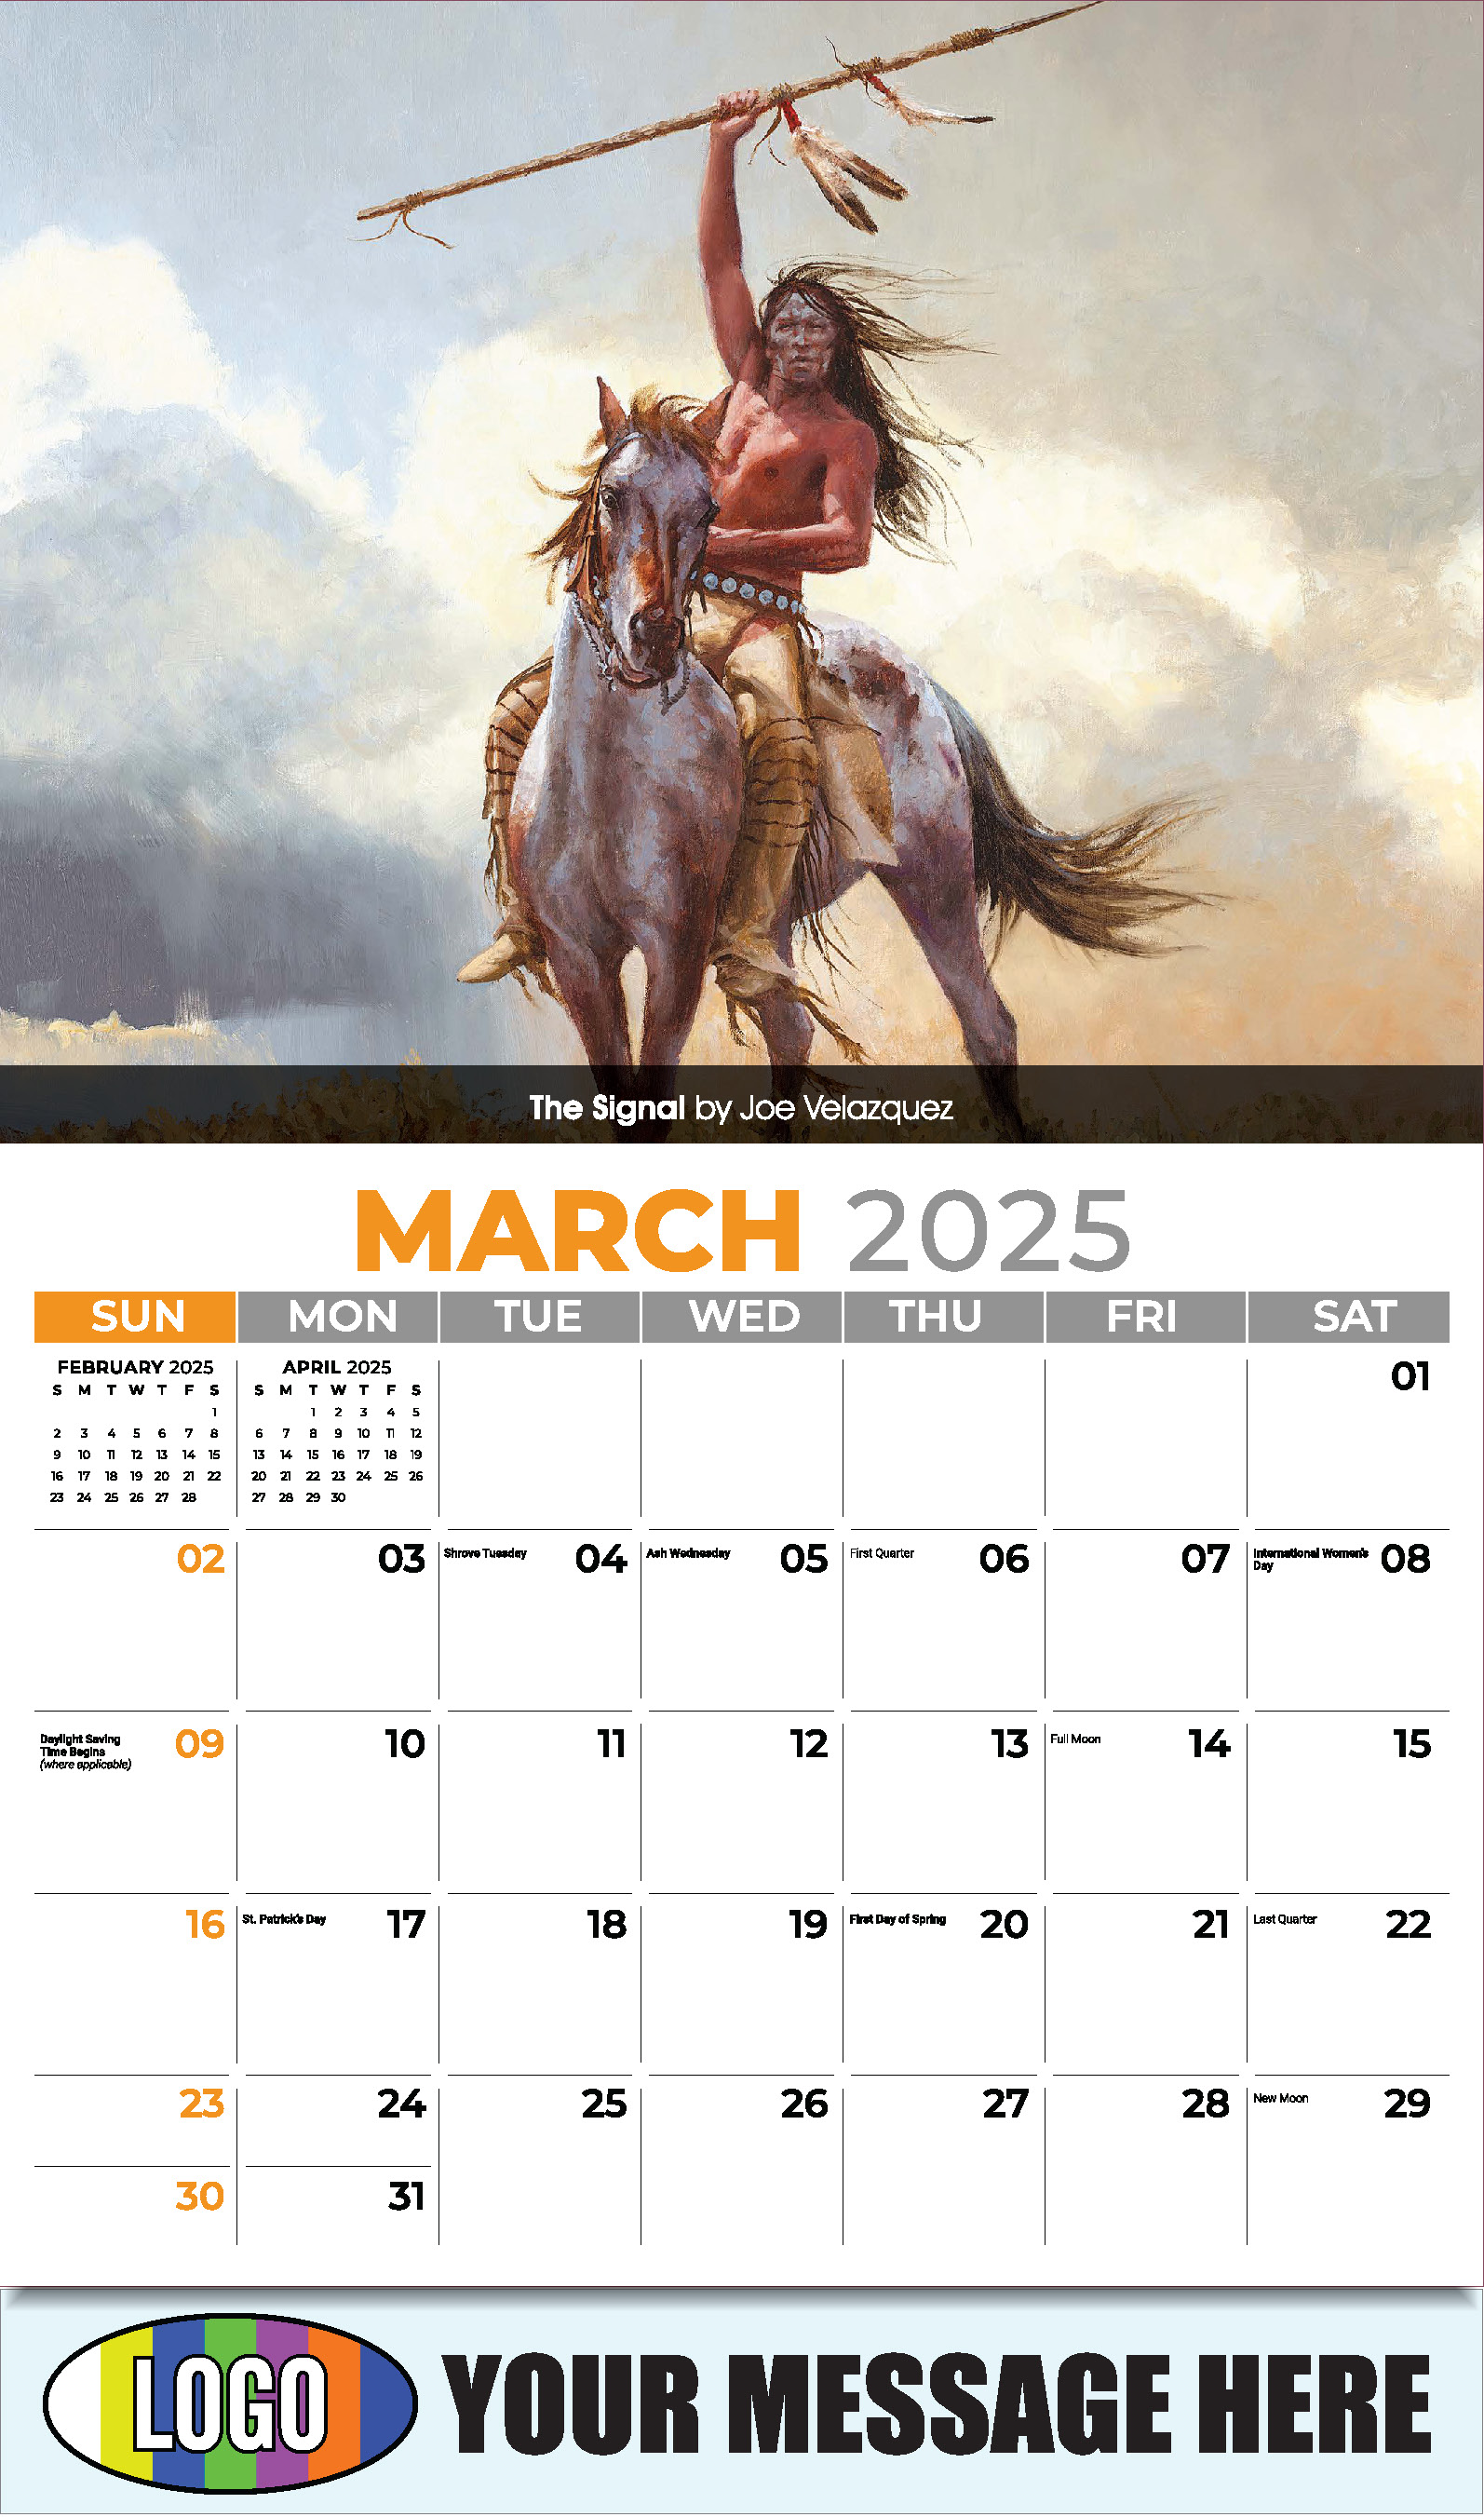 Spirit of the Old West 2025 Old West Art Business Promo Wall Calendar - March